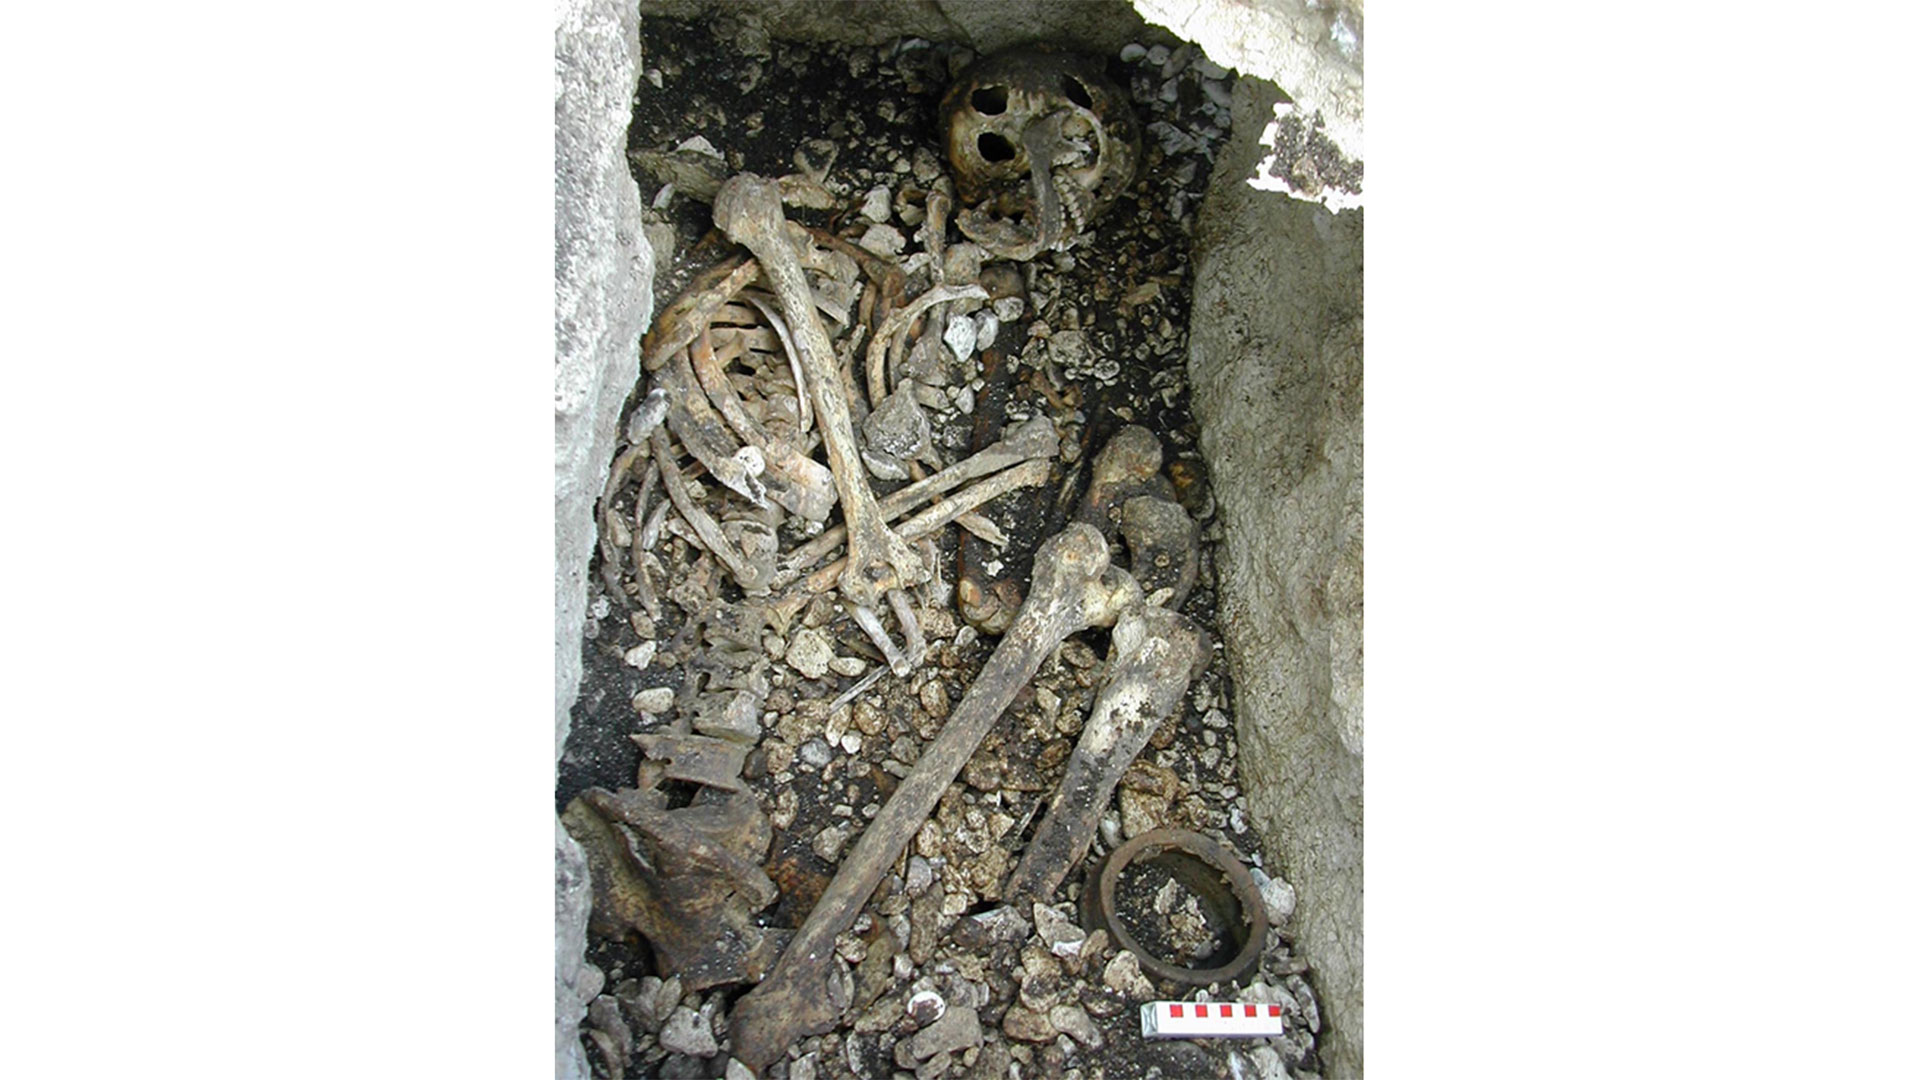 Remains in a burial site in Northern Ireland.